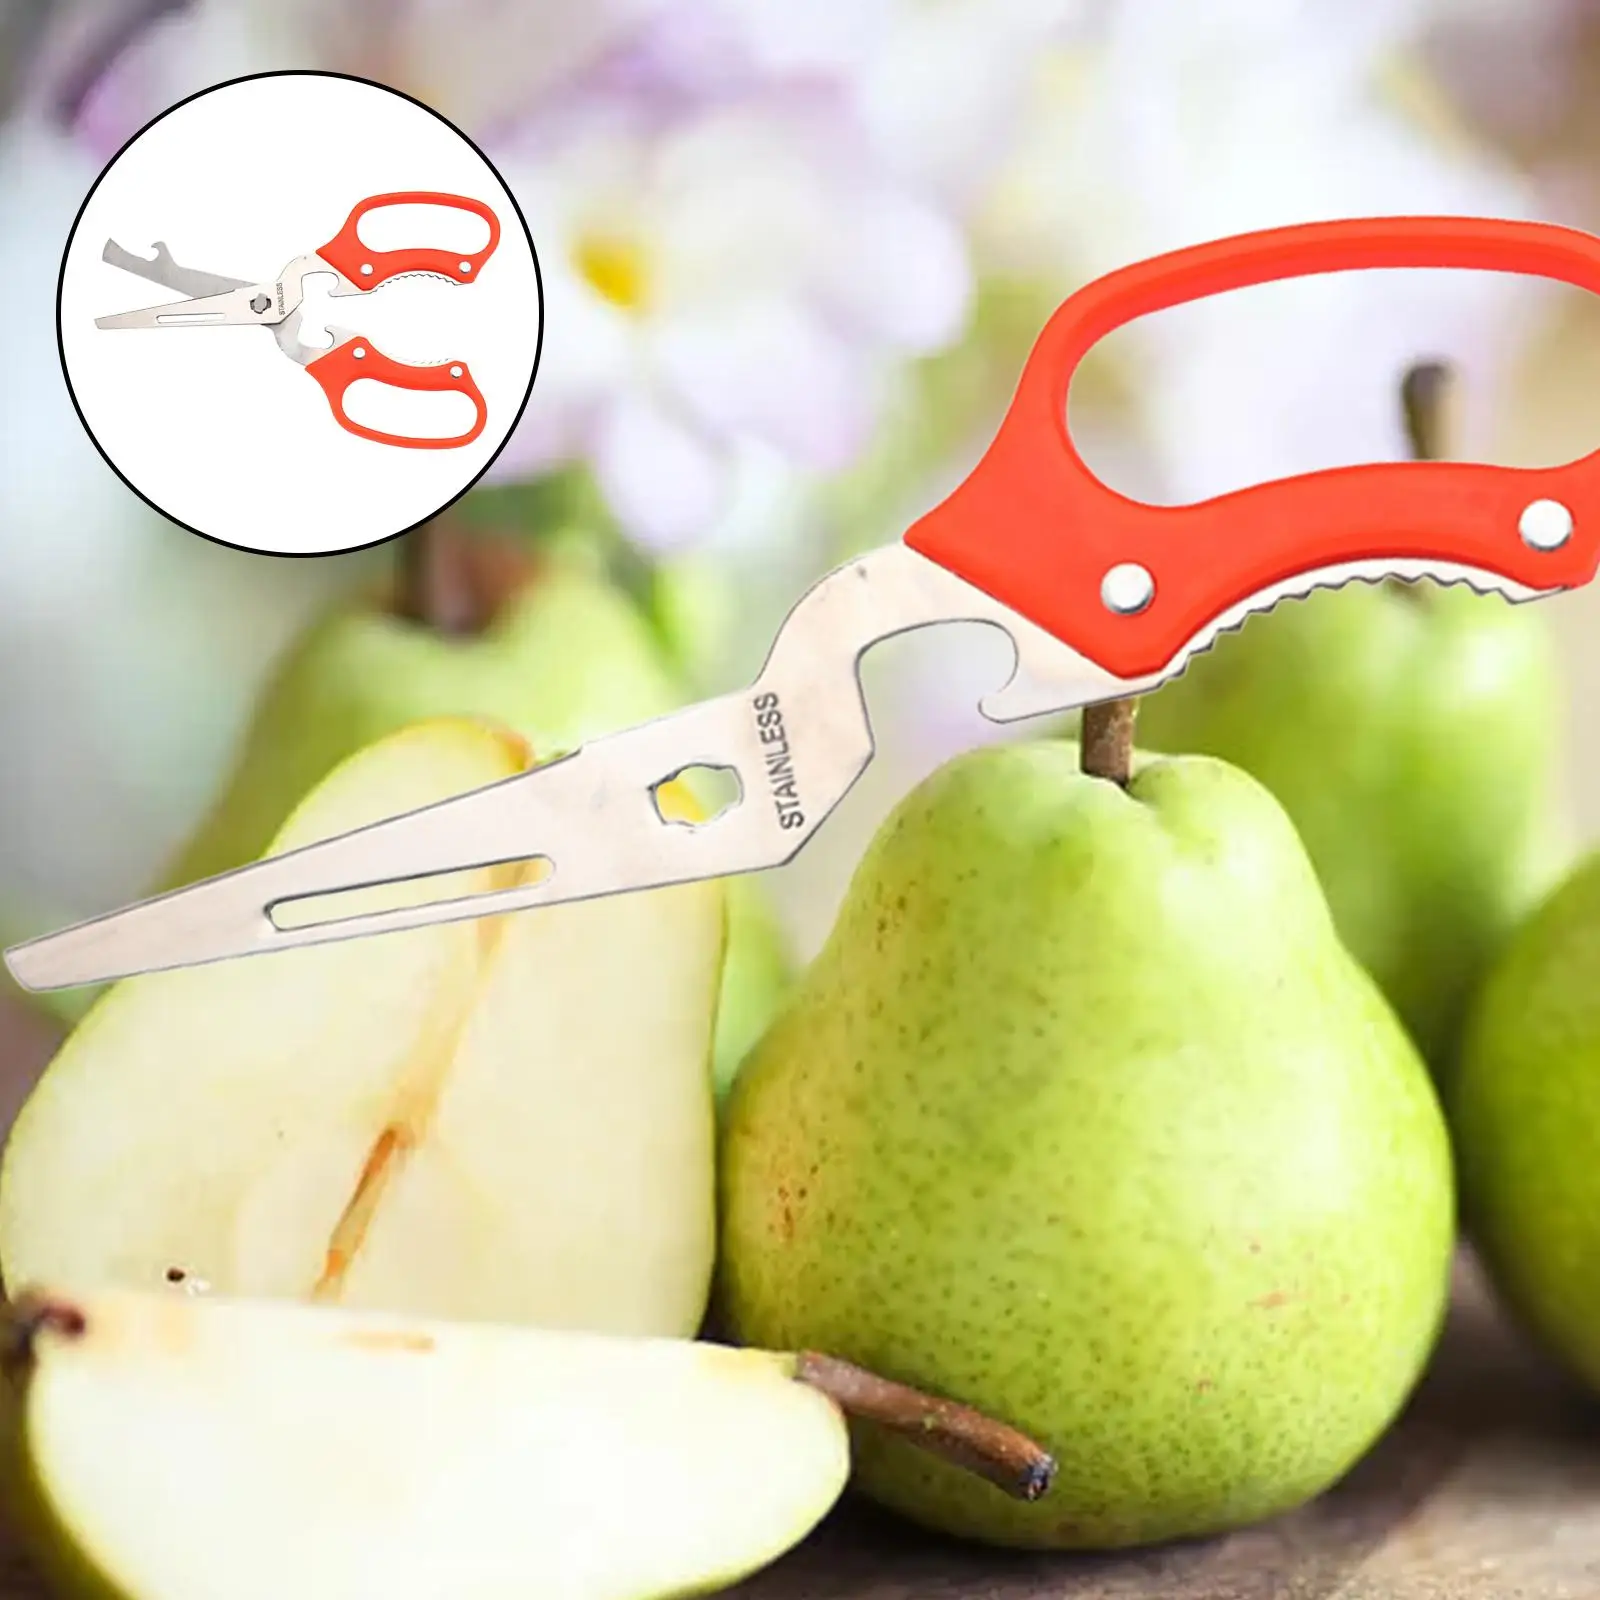 Heavy Duty Kitchen Scissors Chicken  Walnut Tongs Meat Cutting Vegetables Fish Poultry Fruit  for Cooking